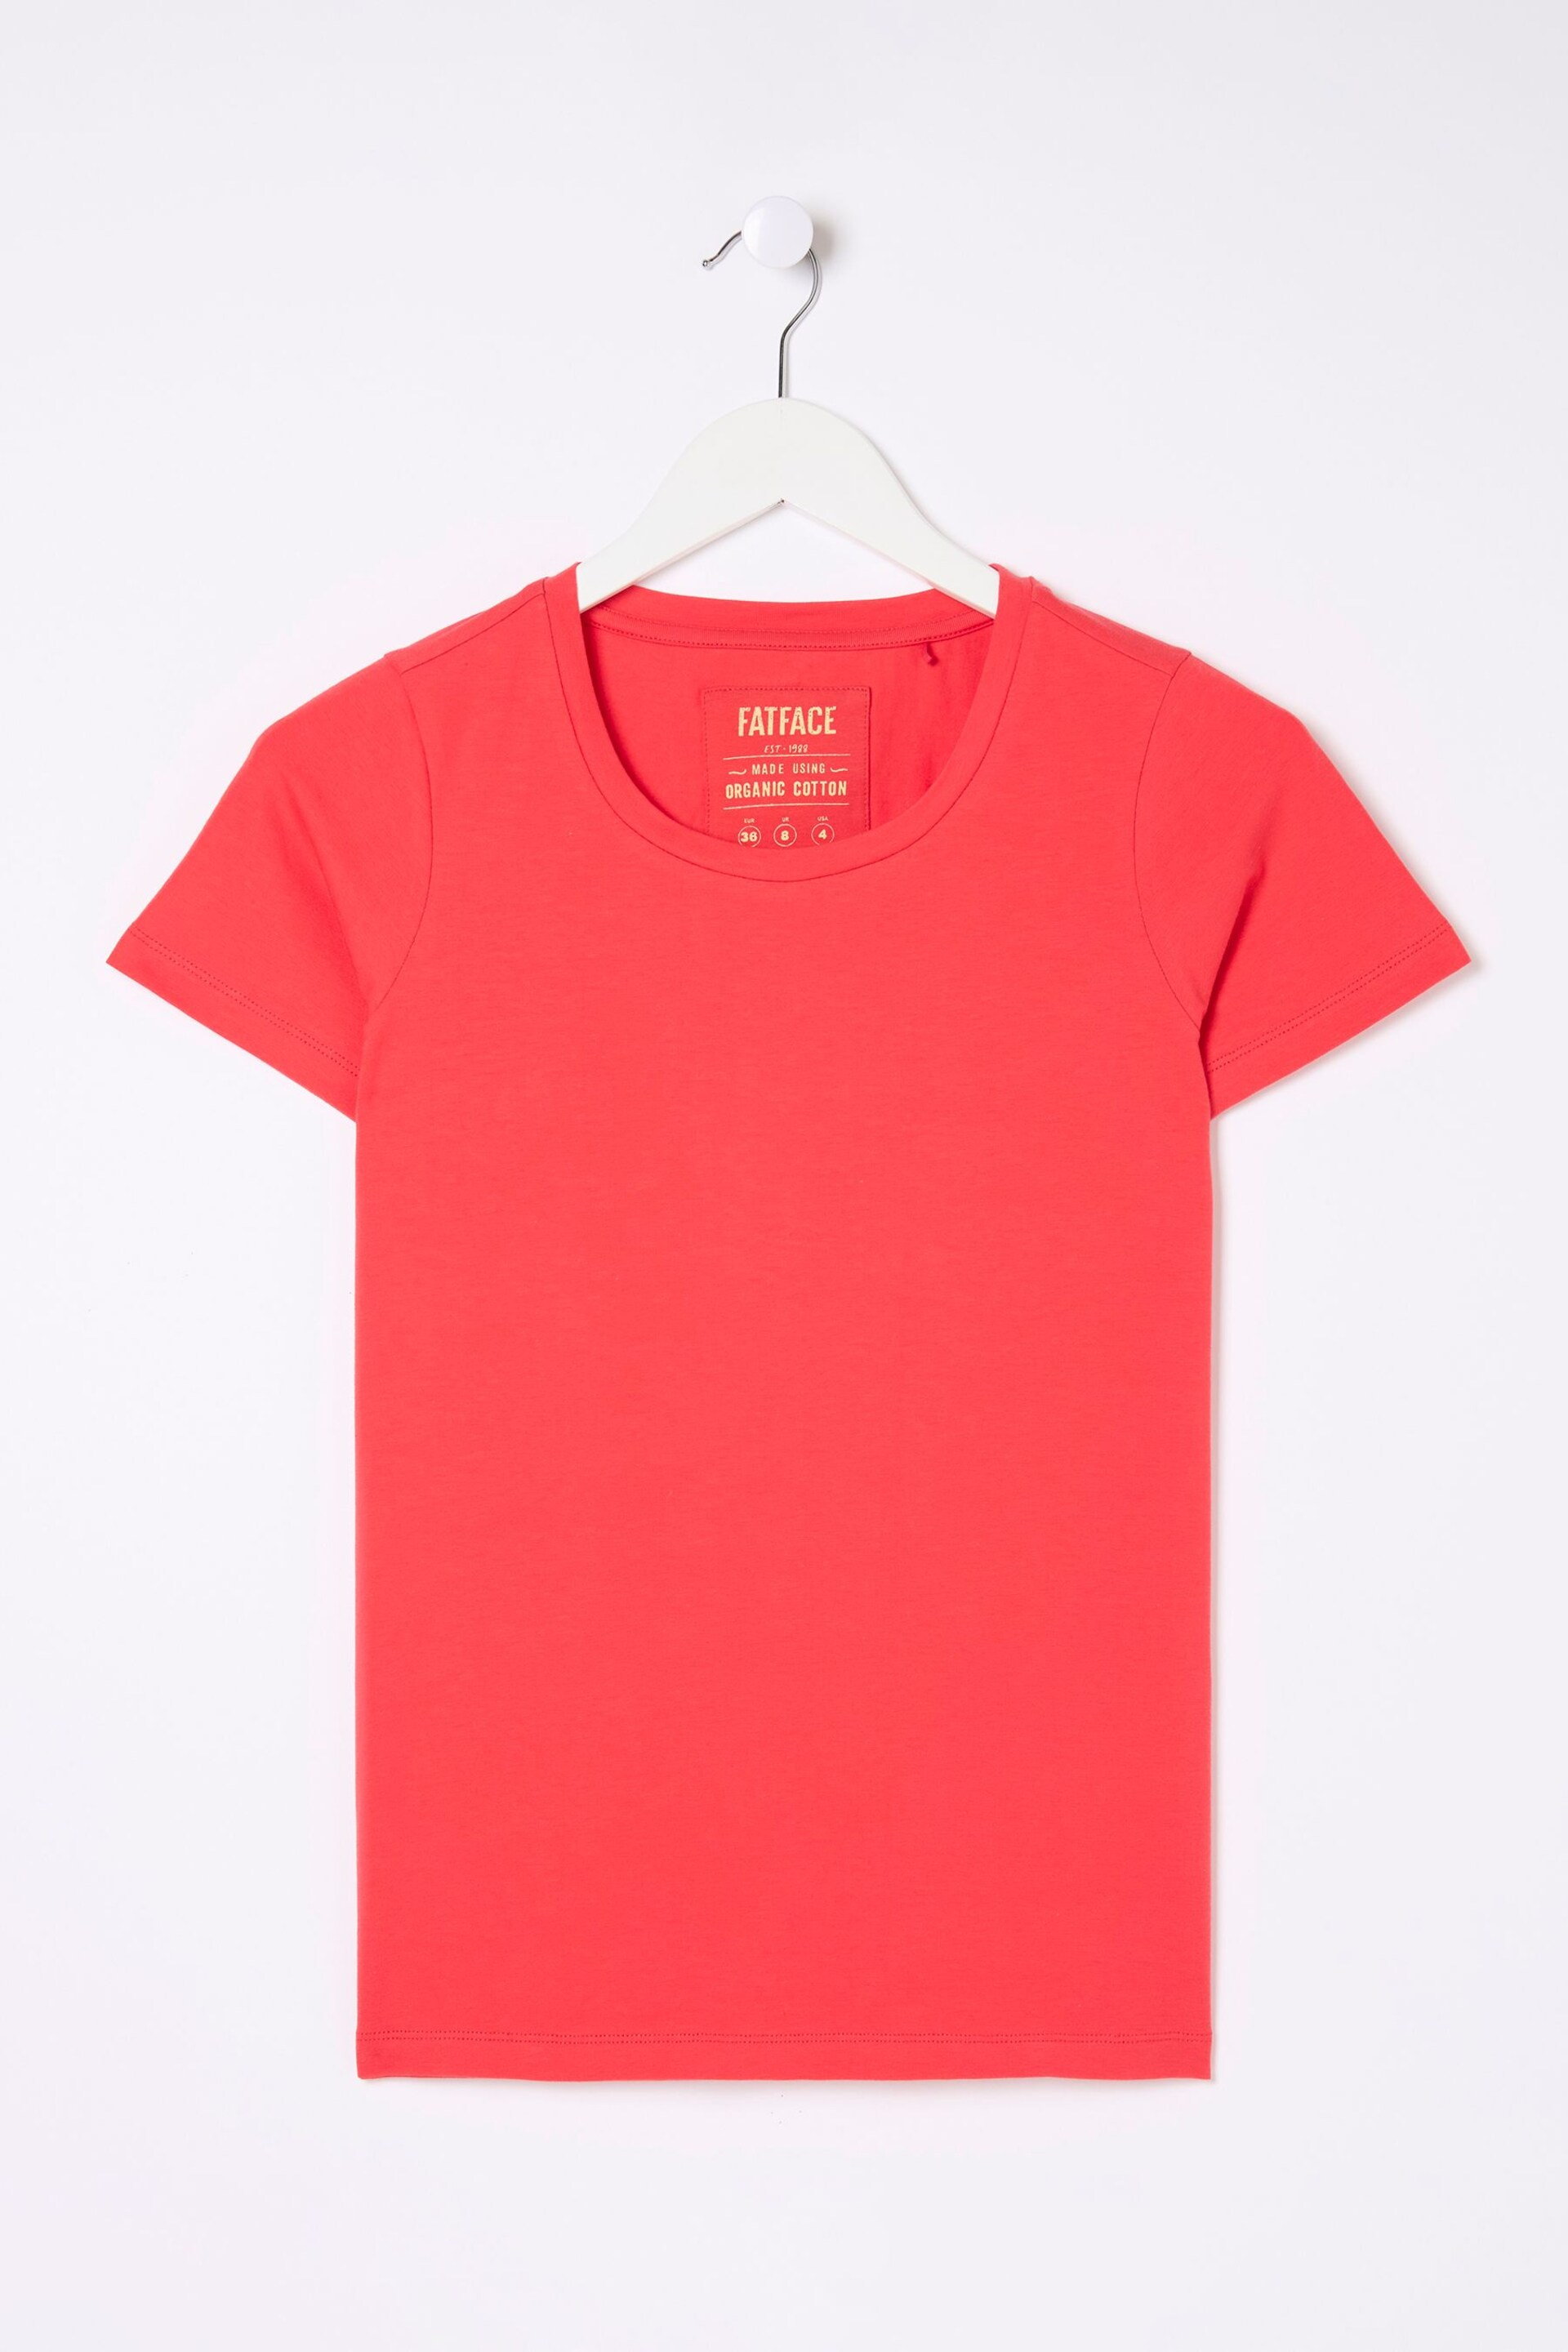 FatFace Red T-Shirt - Image 4 of 4